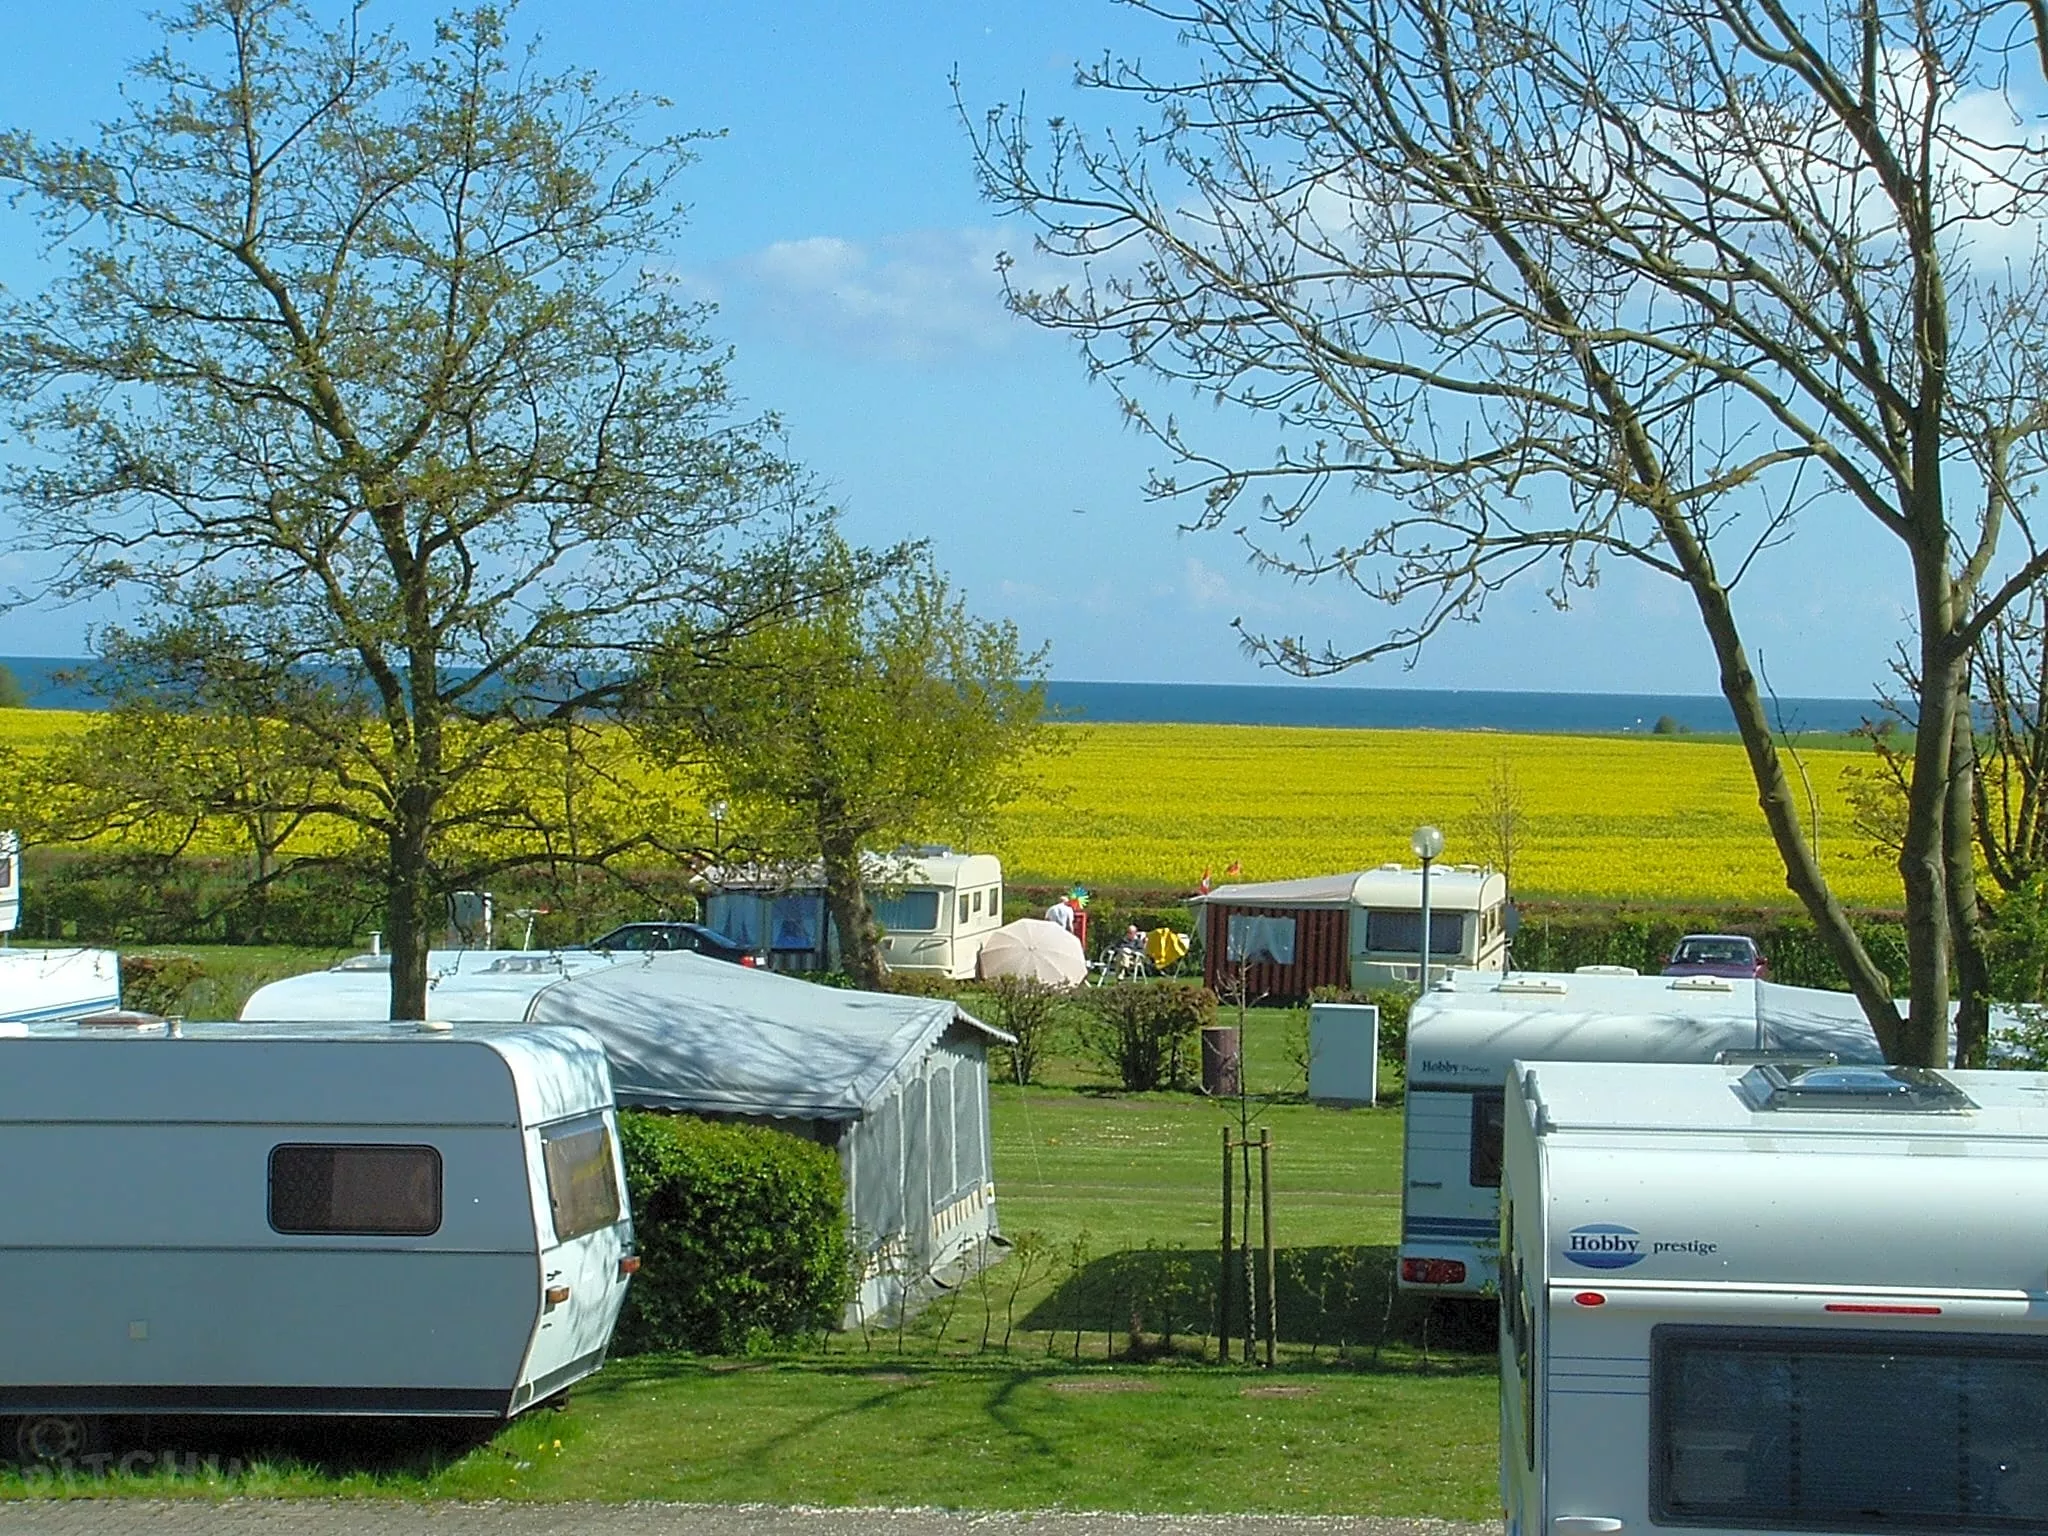 Rosenfelder Strand Ostsee Camping in Germany, Europe | Campsites - Rated 5.5